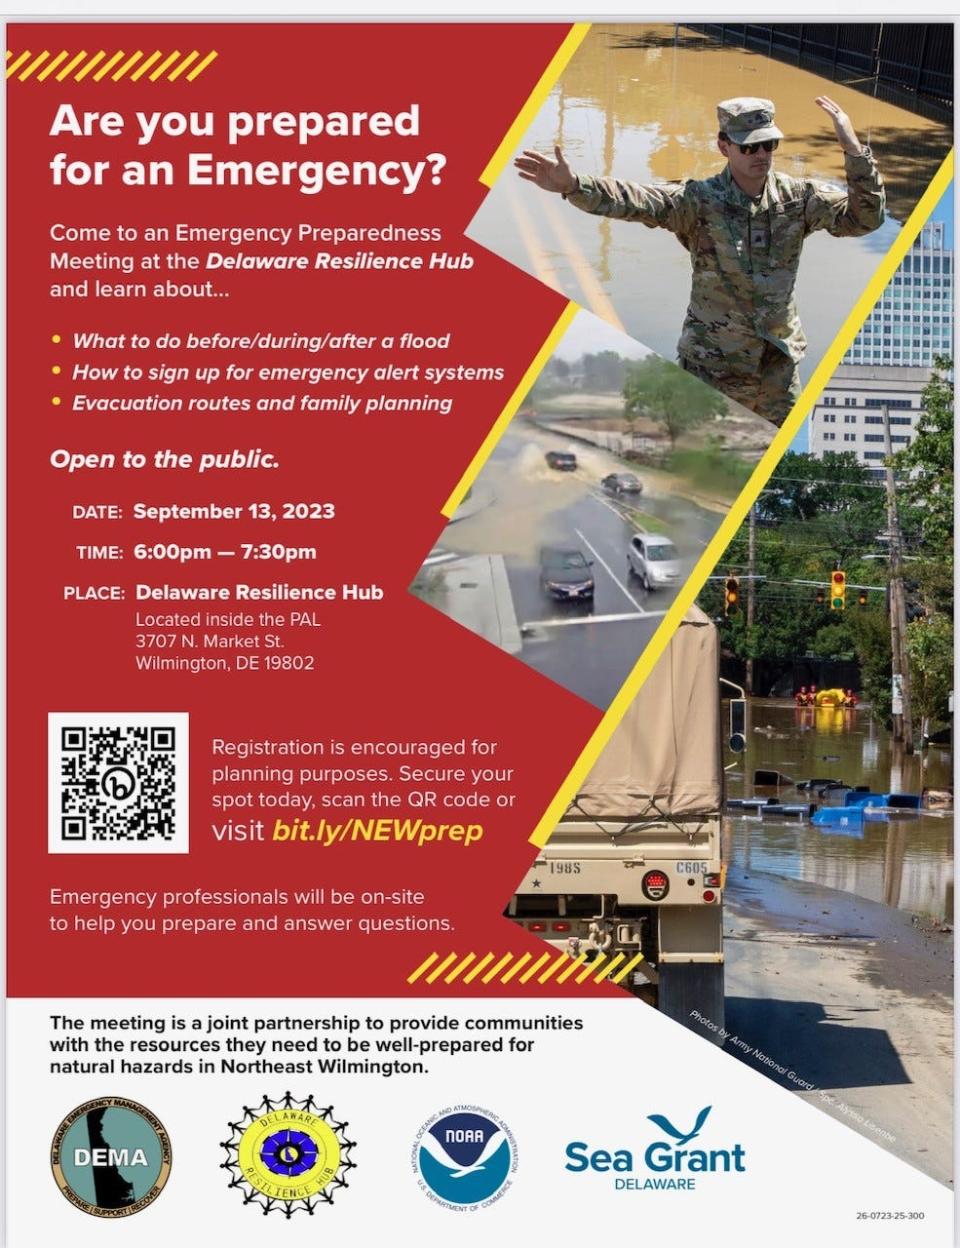 The Delaware Resilience Hub, a community group focused on engagement and climate-change-fueled disaster readiness launched in 2023, will host an emergency preparedness day from 6 to 7:30 p.m. on Wednesday, Sept. 13. Registration is encouraged but not required.